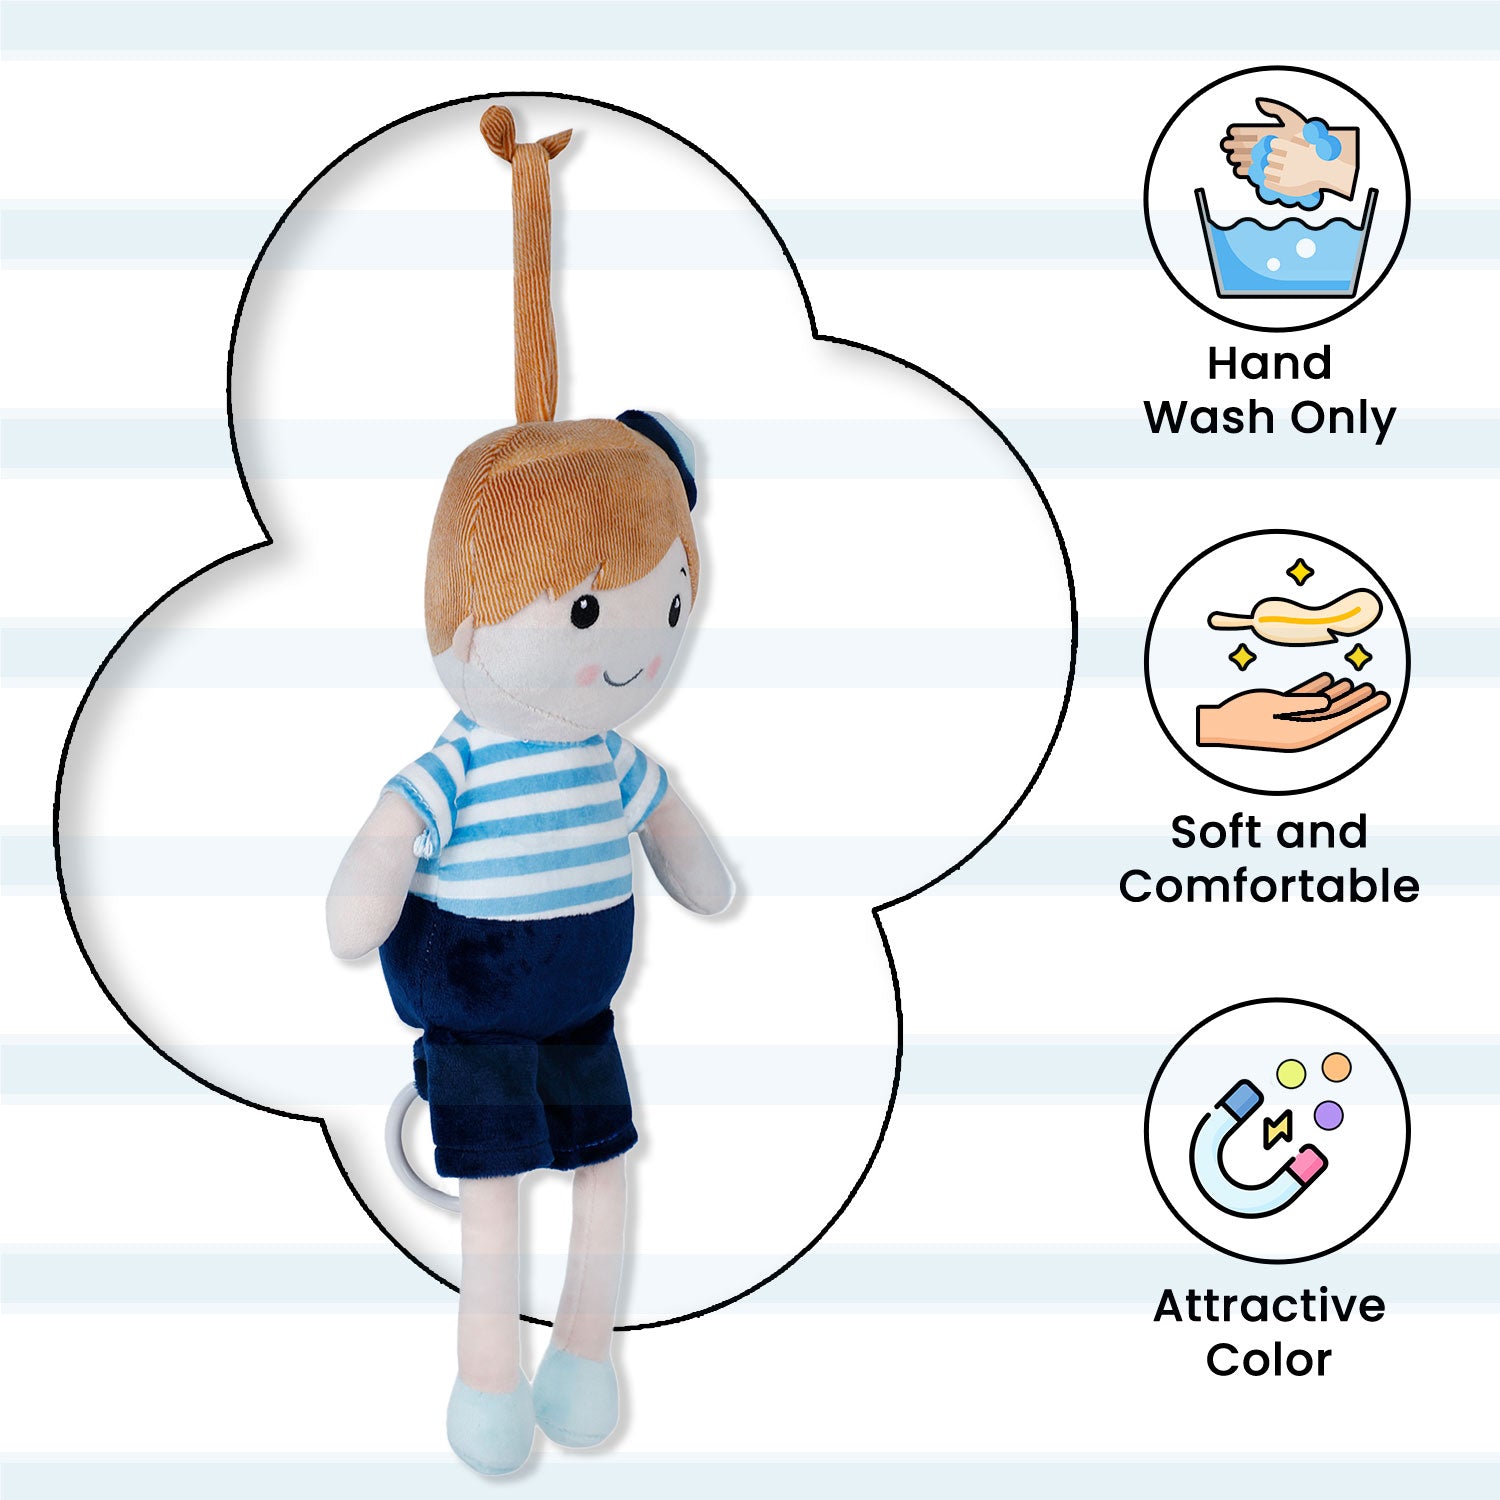 Baby Moo Chubby Boy Hanging Musical Pulling Toy Doll - Navy Blue